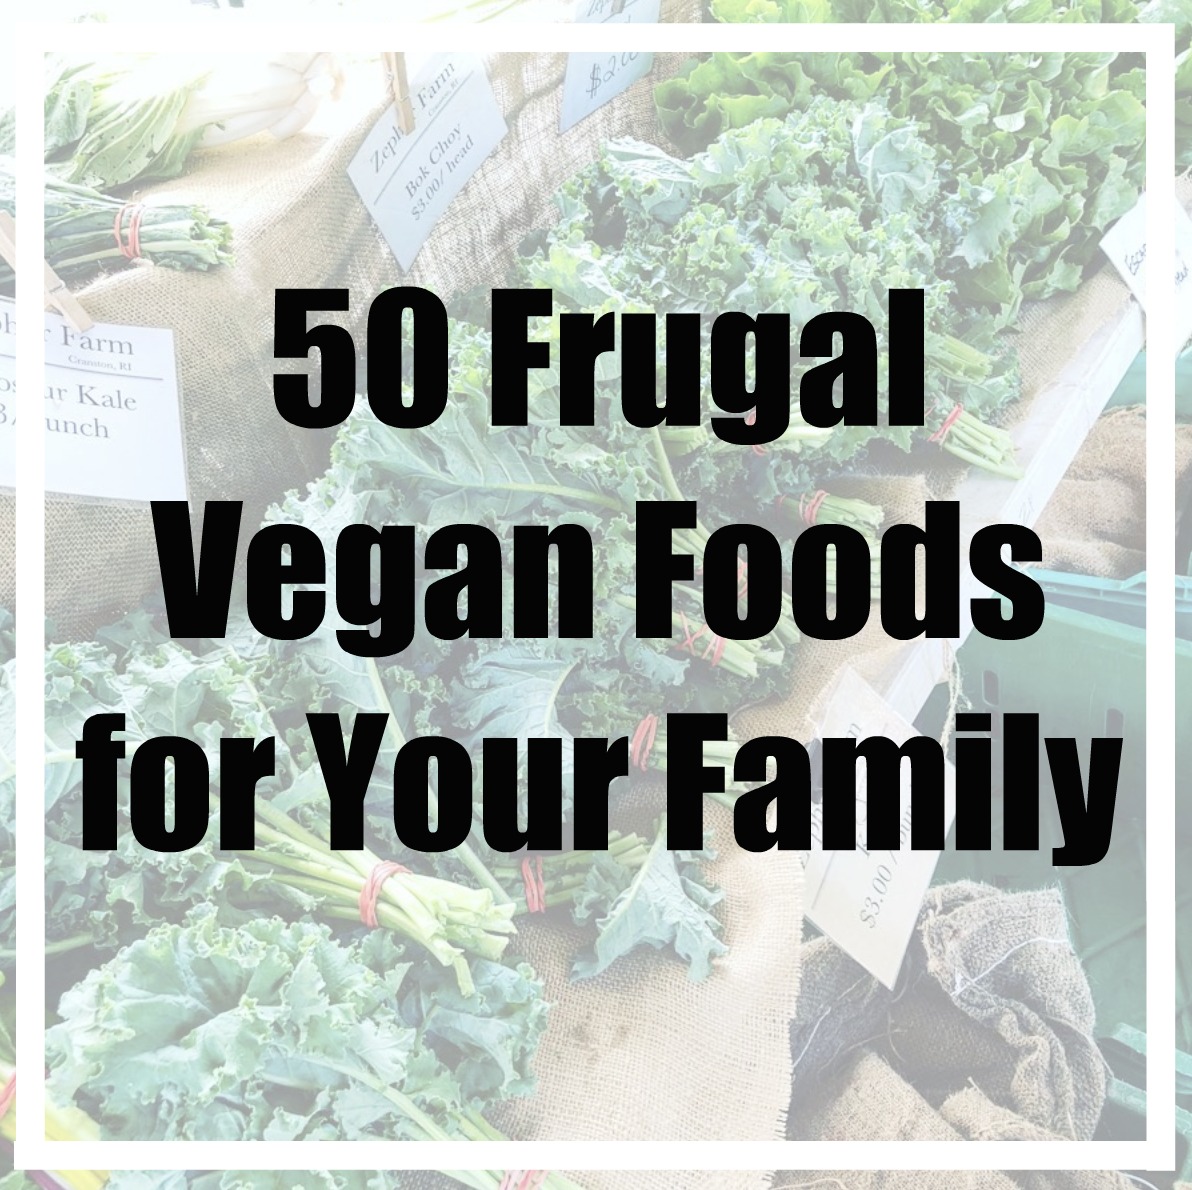 50 Frugal Vegan Foods for Your Family